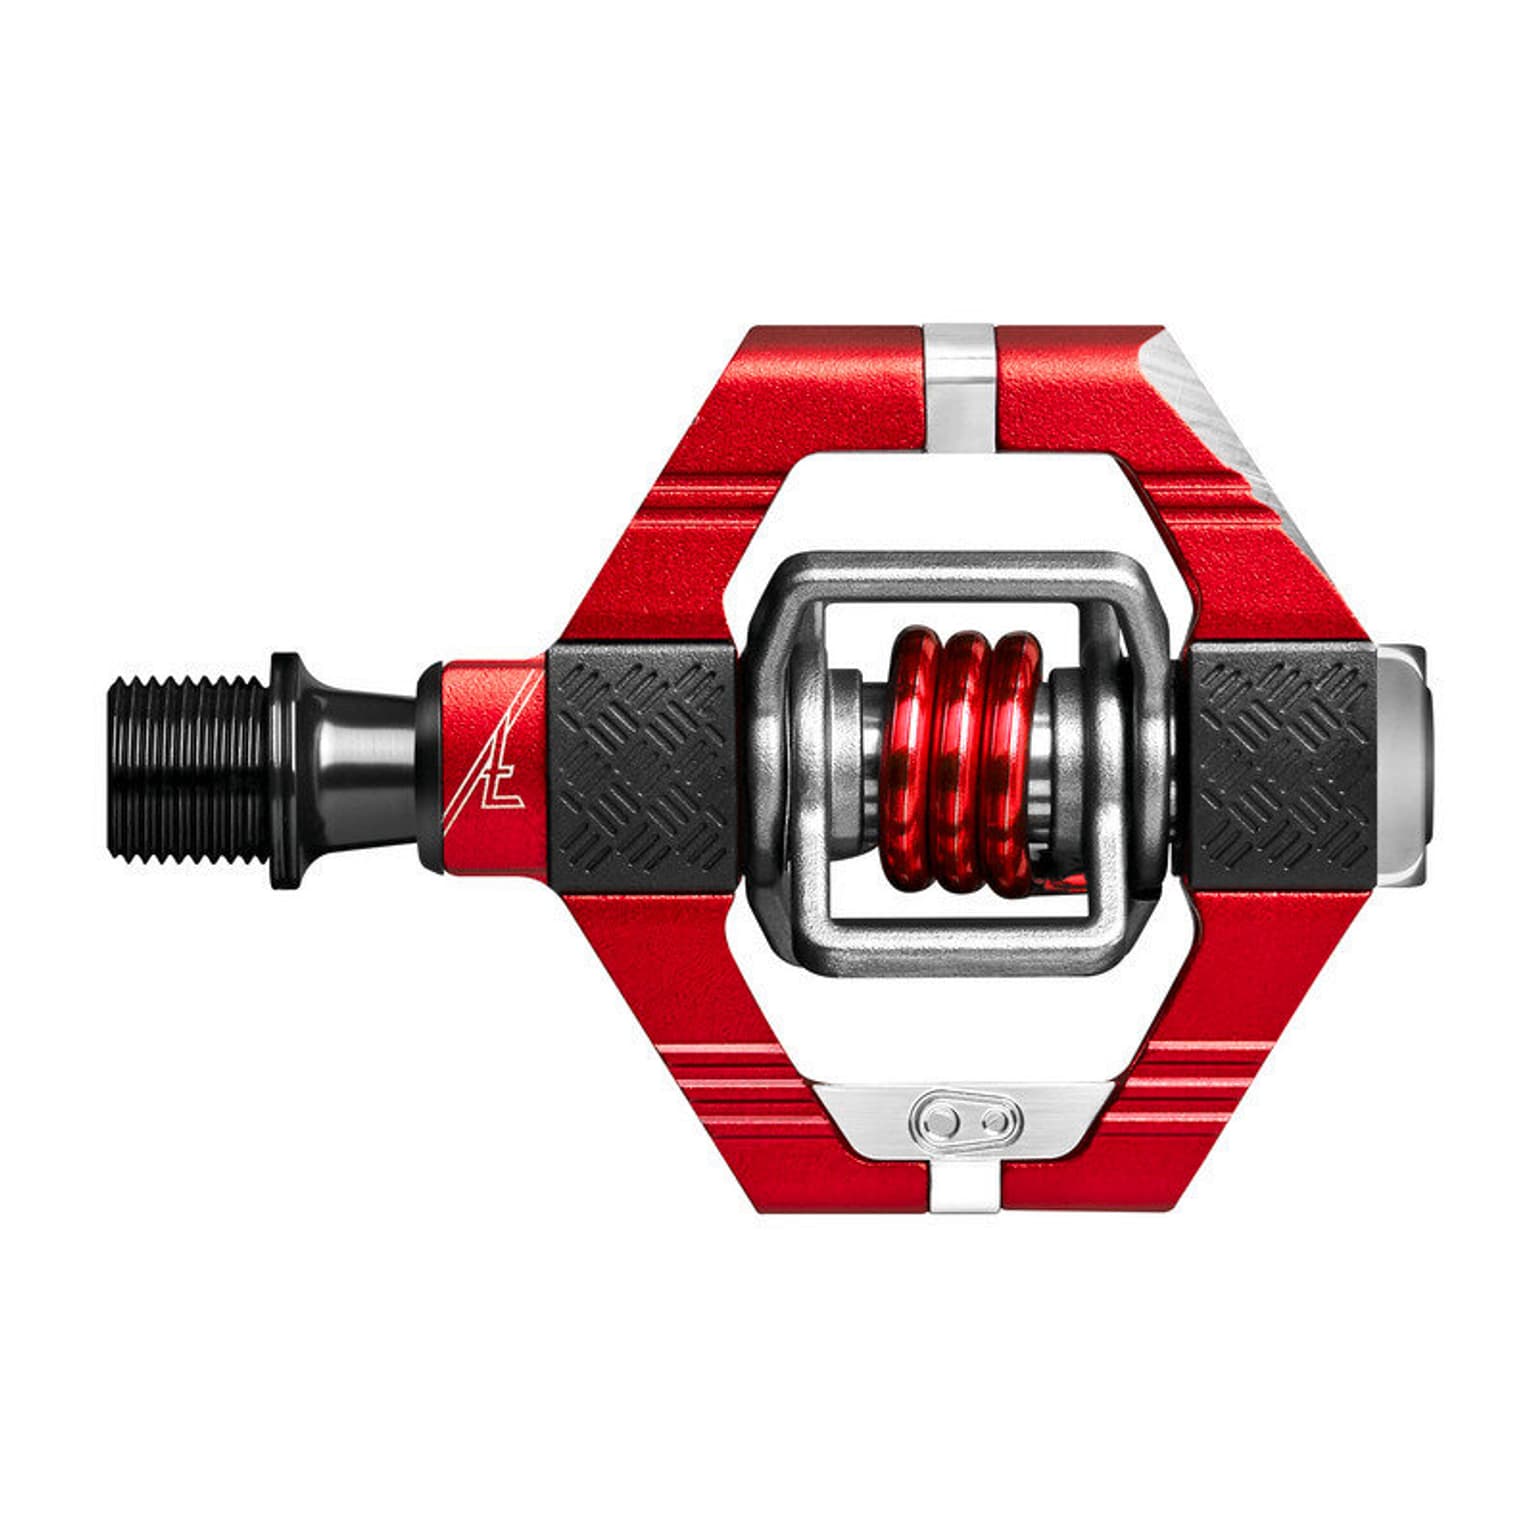 crankbrothers crankbrothers Pedale Candy 7 Pedali 1